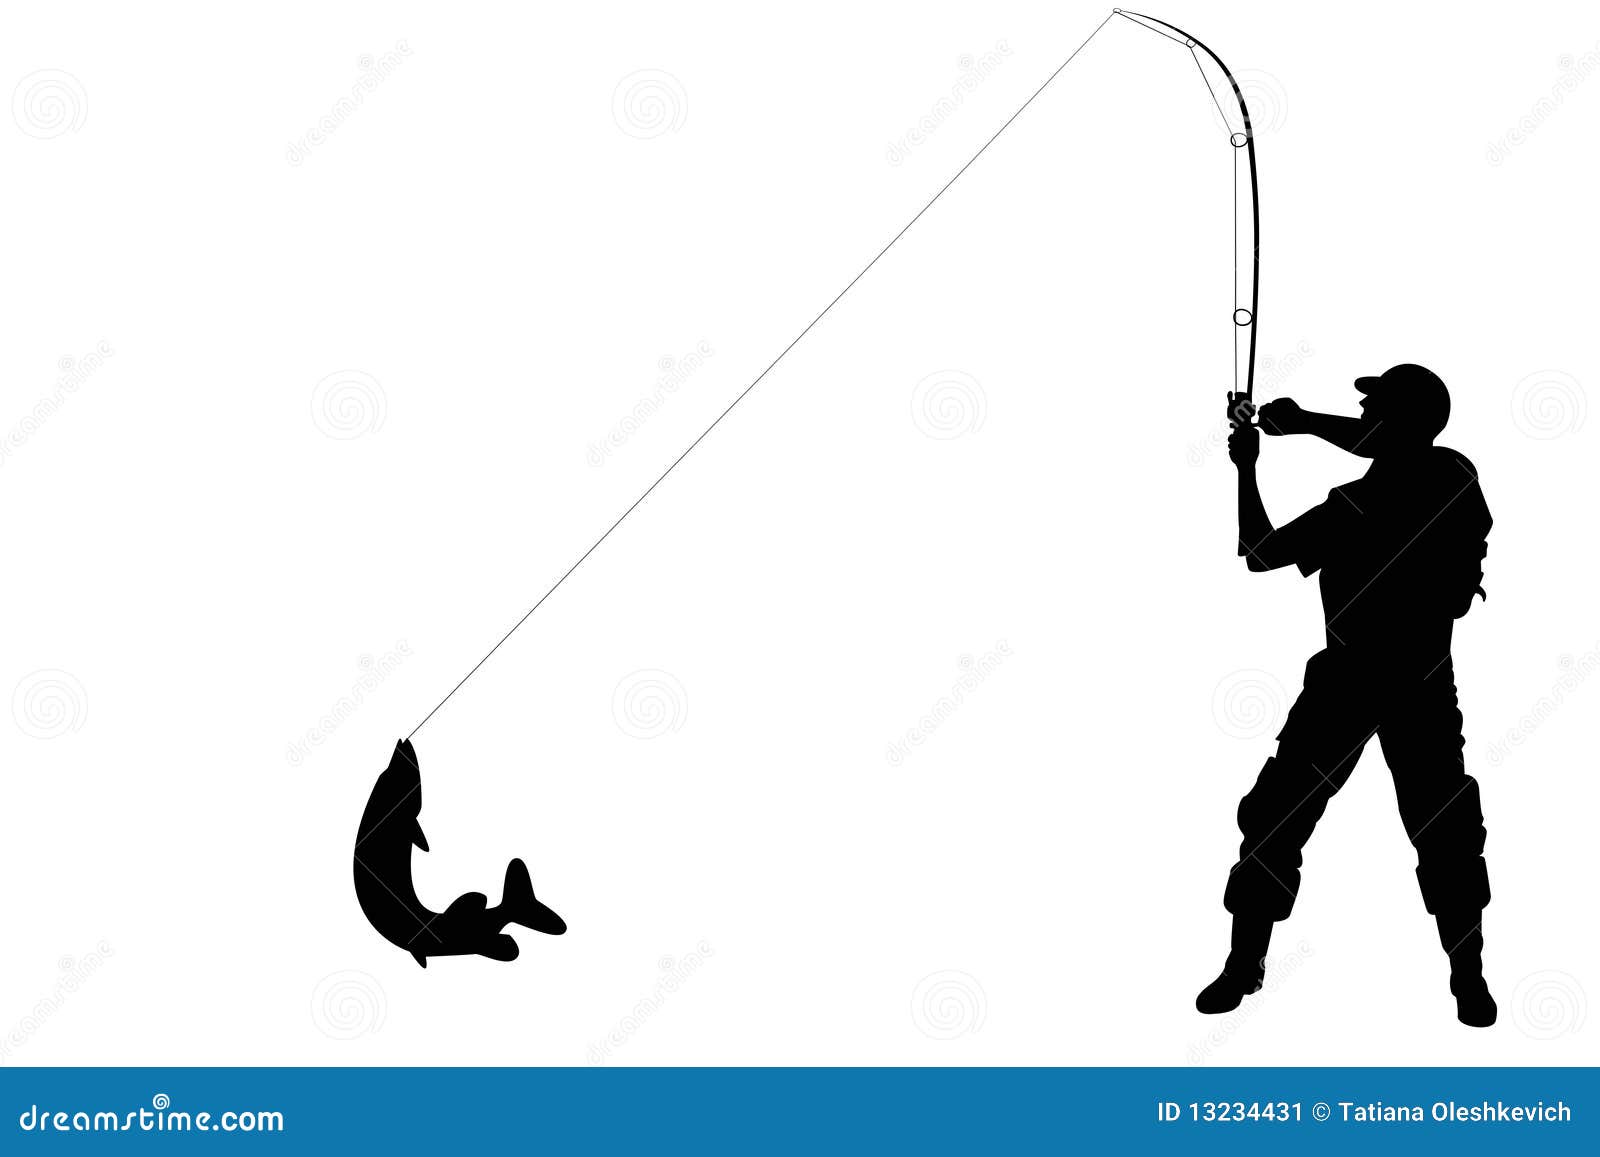 silhouette of a fisherman with a pike fish